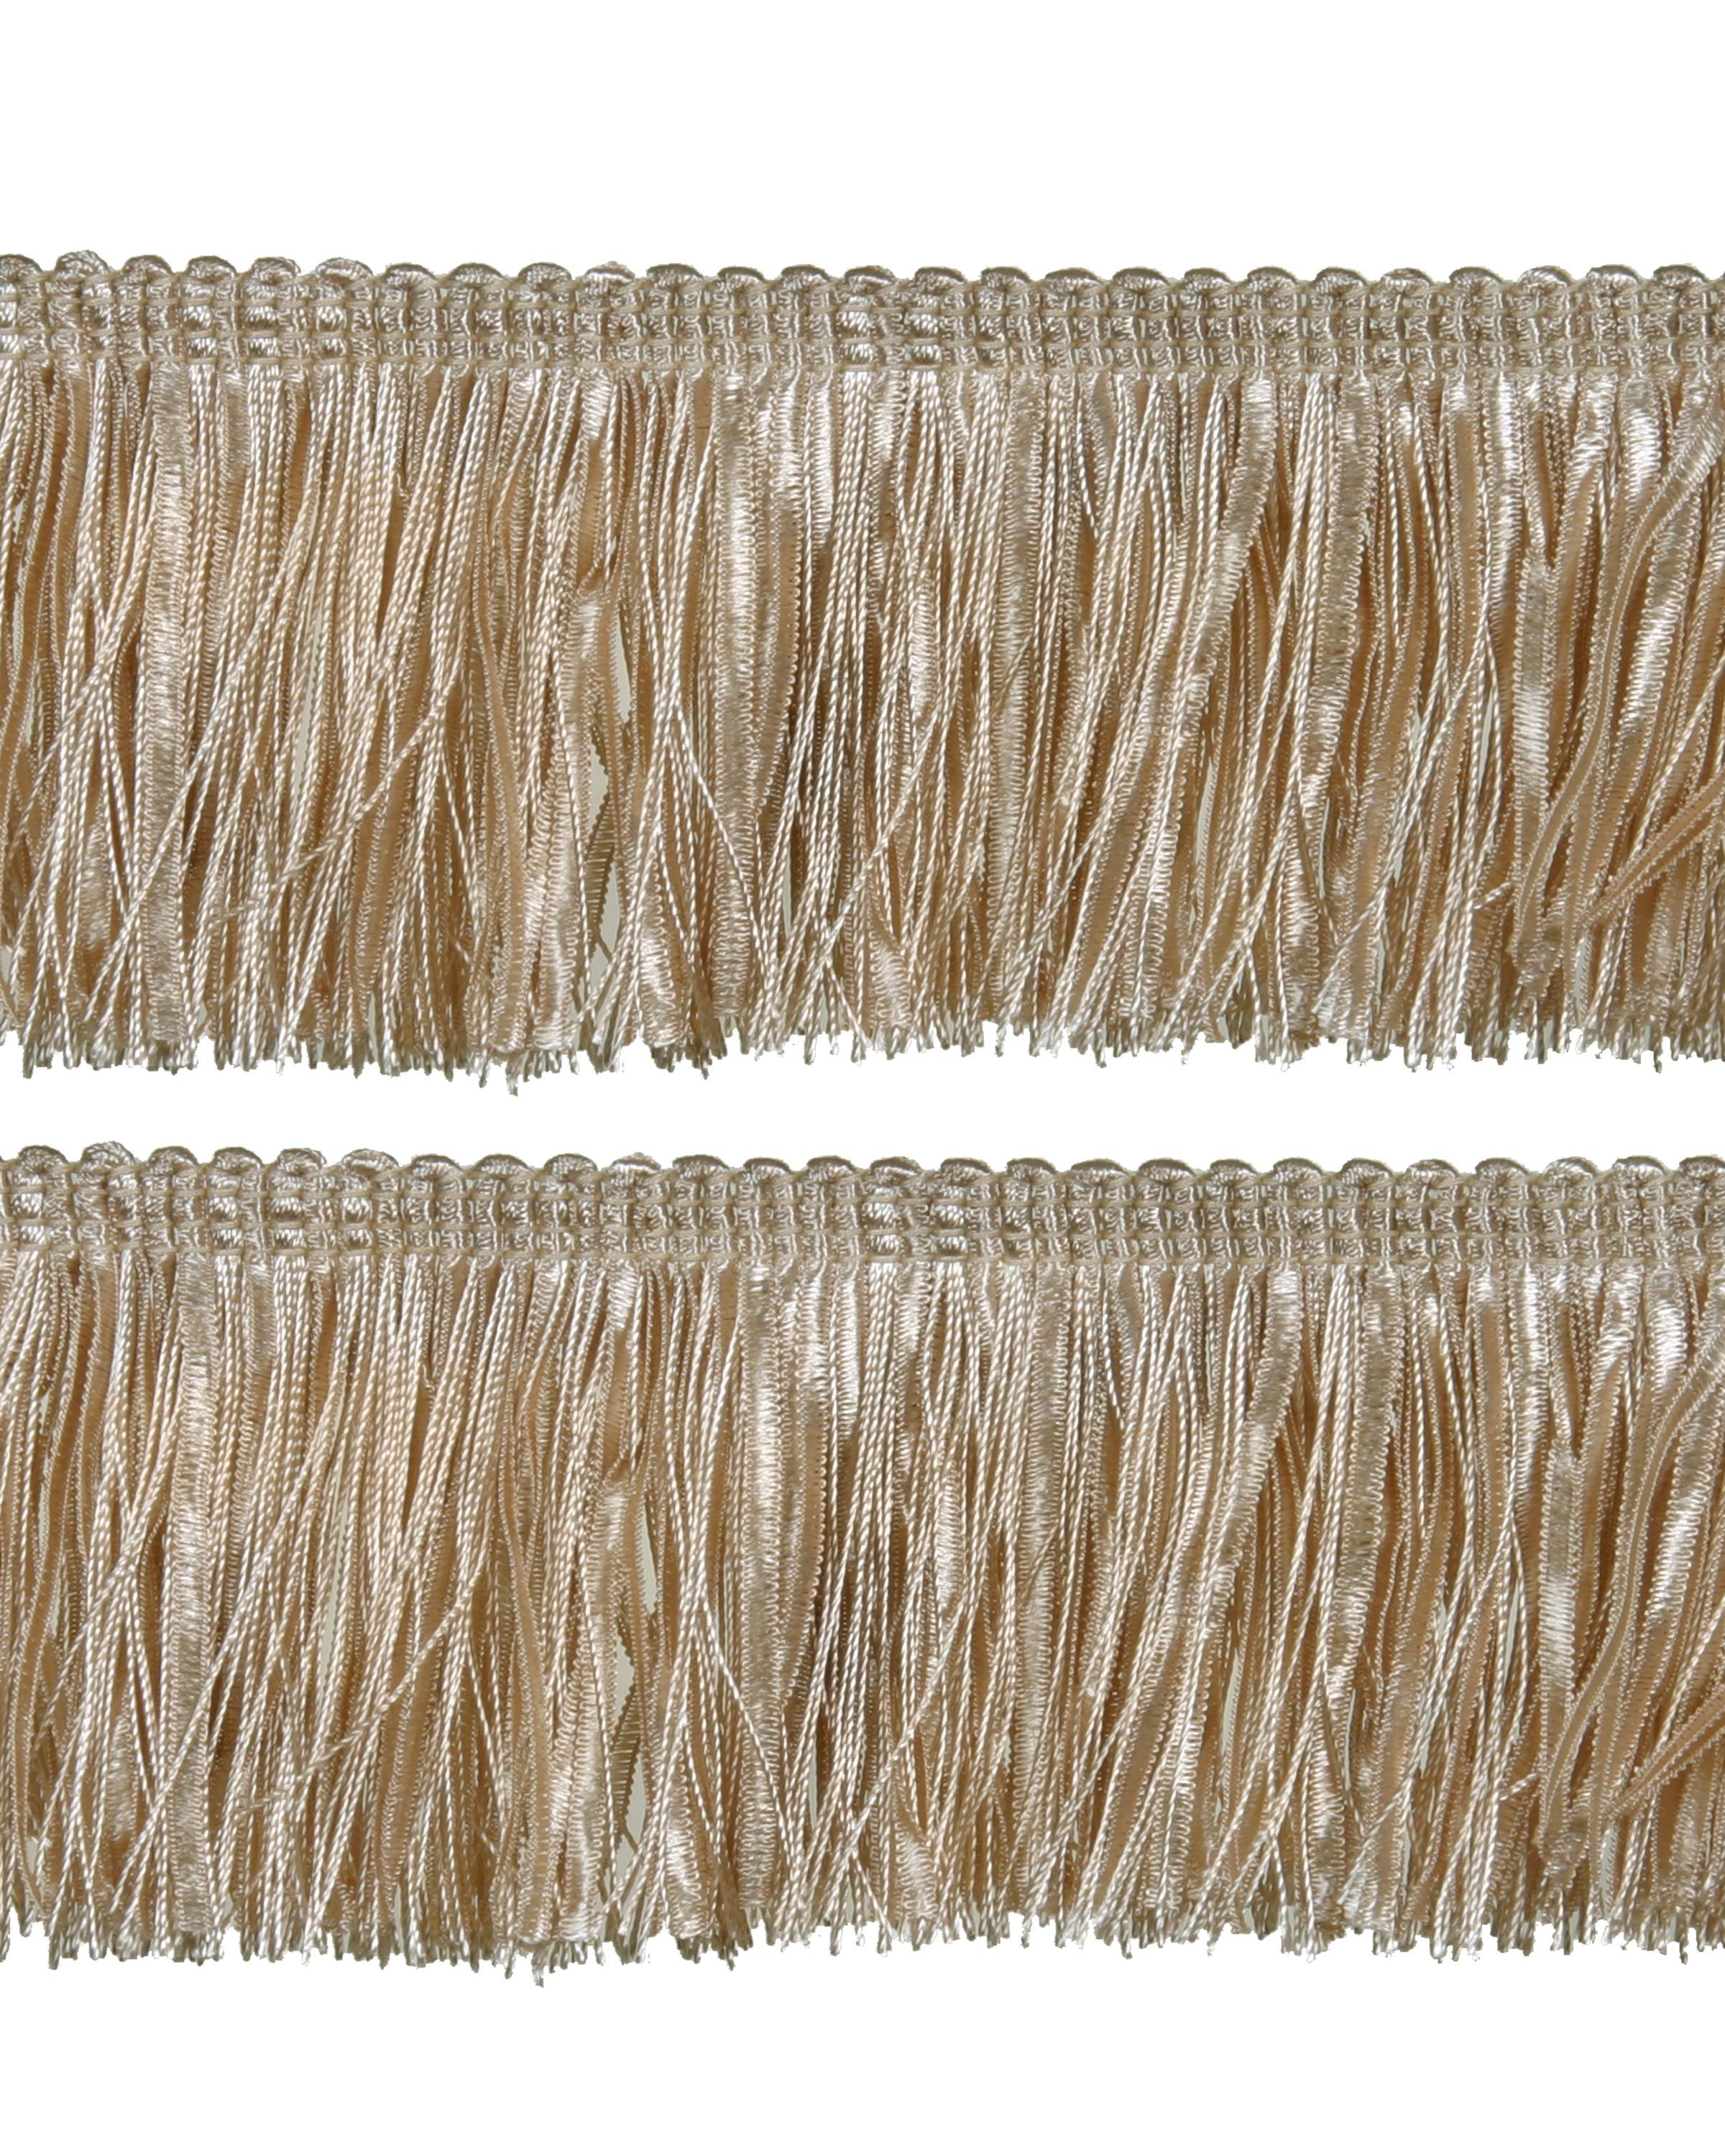 Bullion Fringe with Ribbons - Creamy Gold 60mm Price is for 5 metres